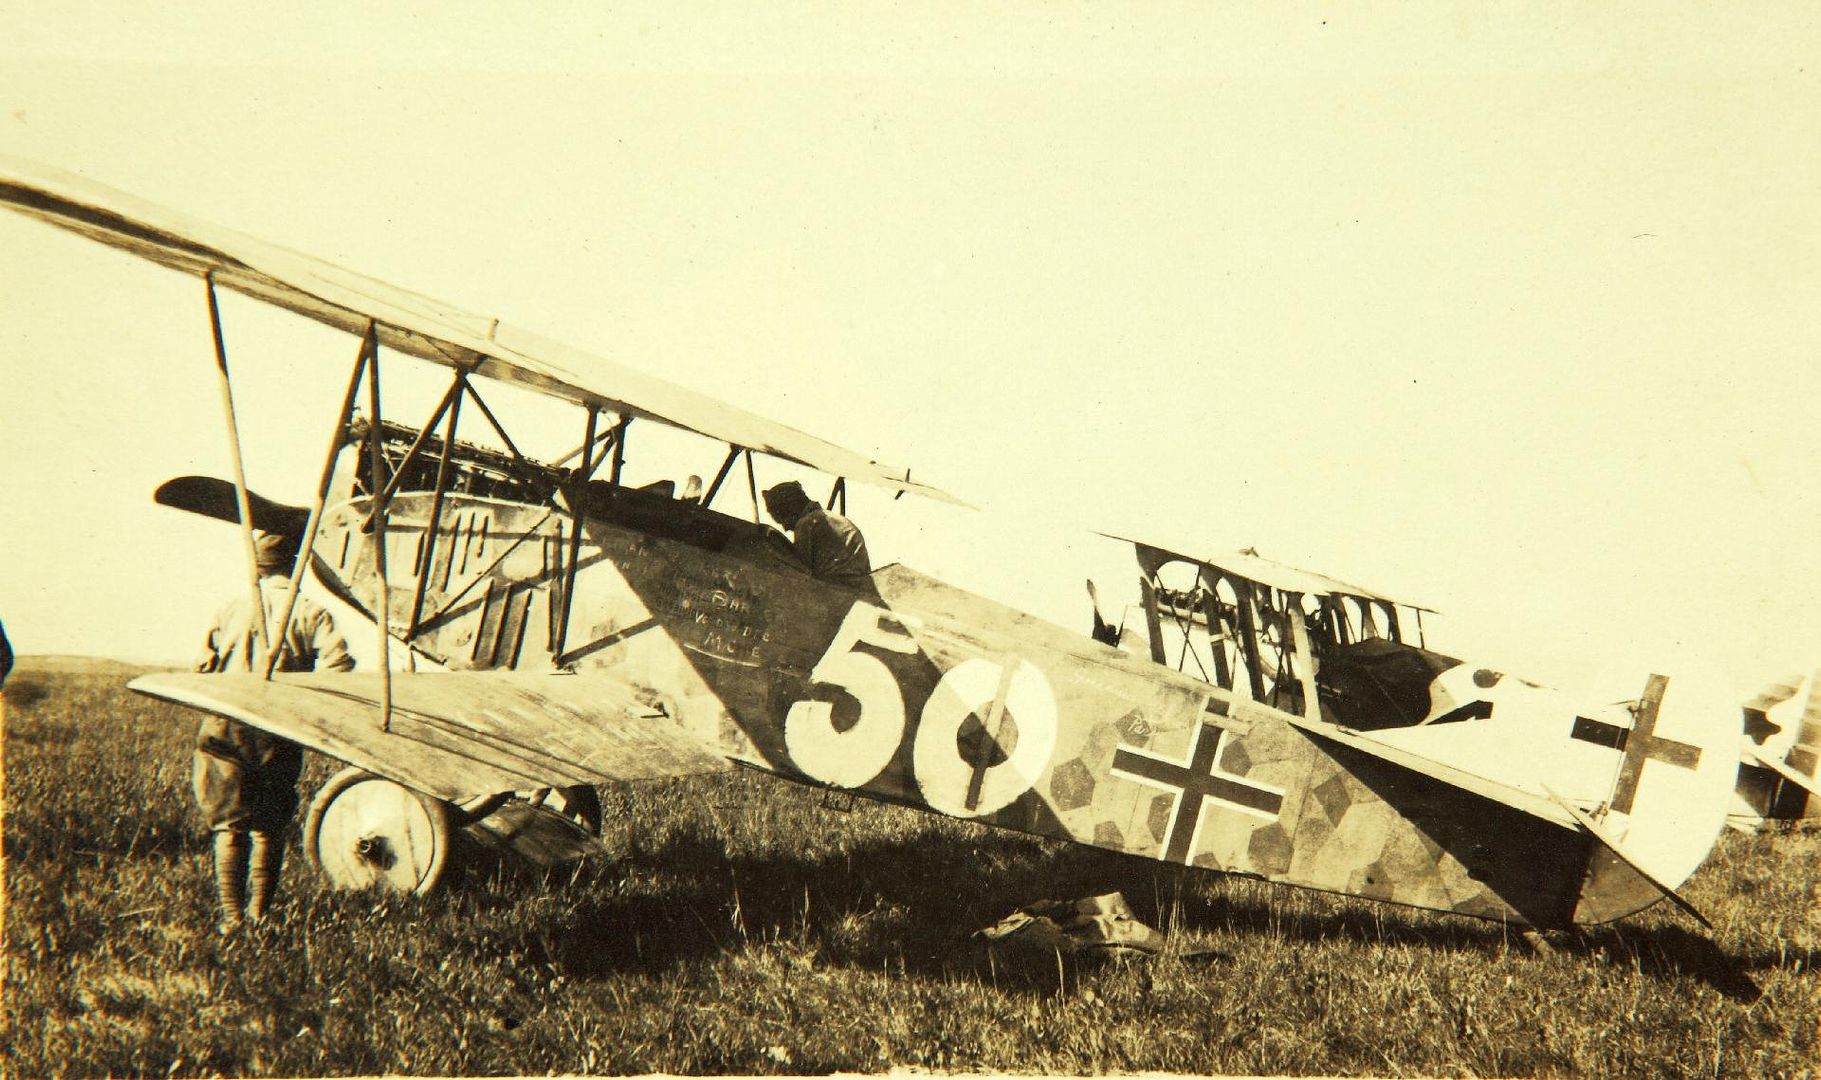 The Number 50 On The Side Was Crudely Painted On For The Aerial Race And Not A Wartime Insignia